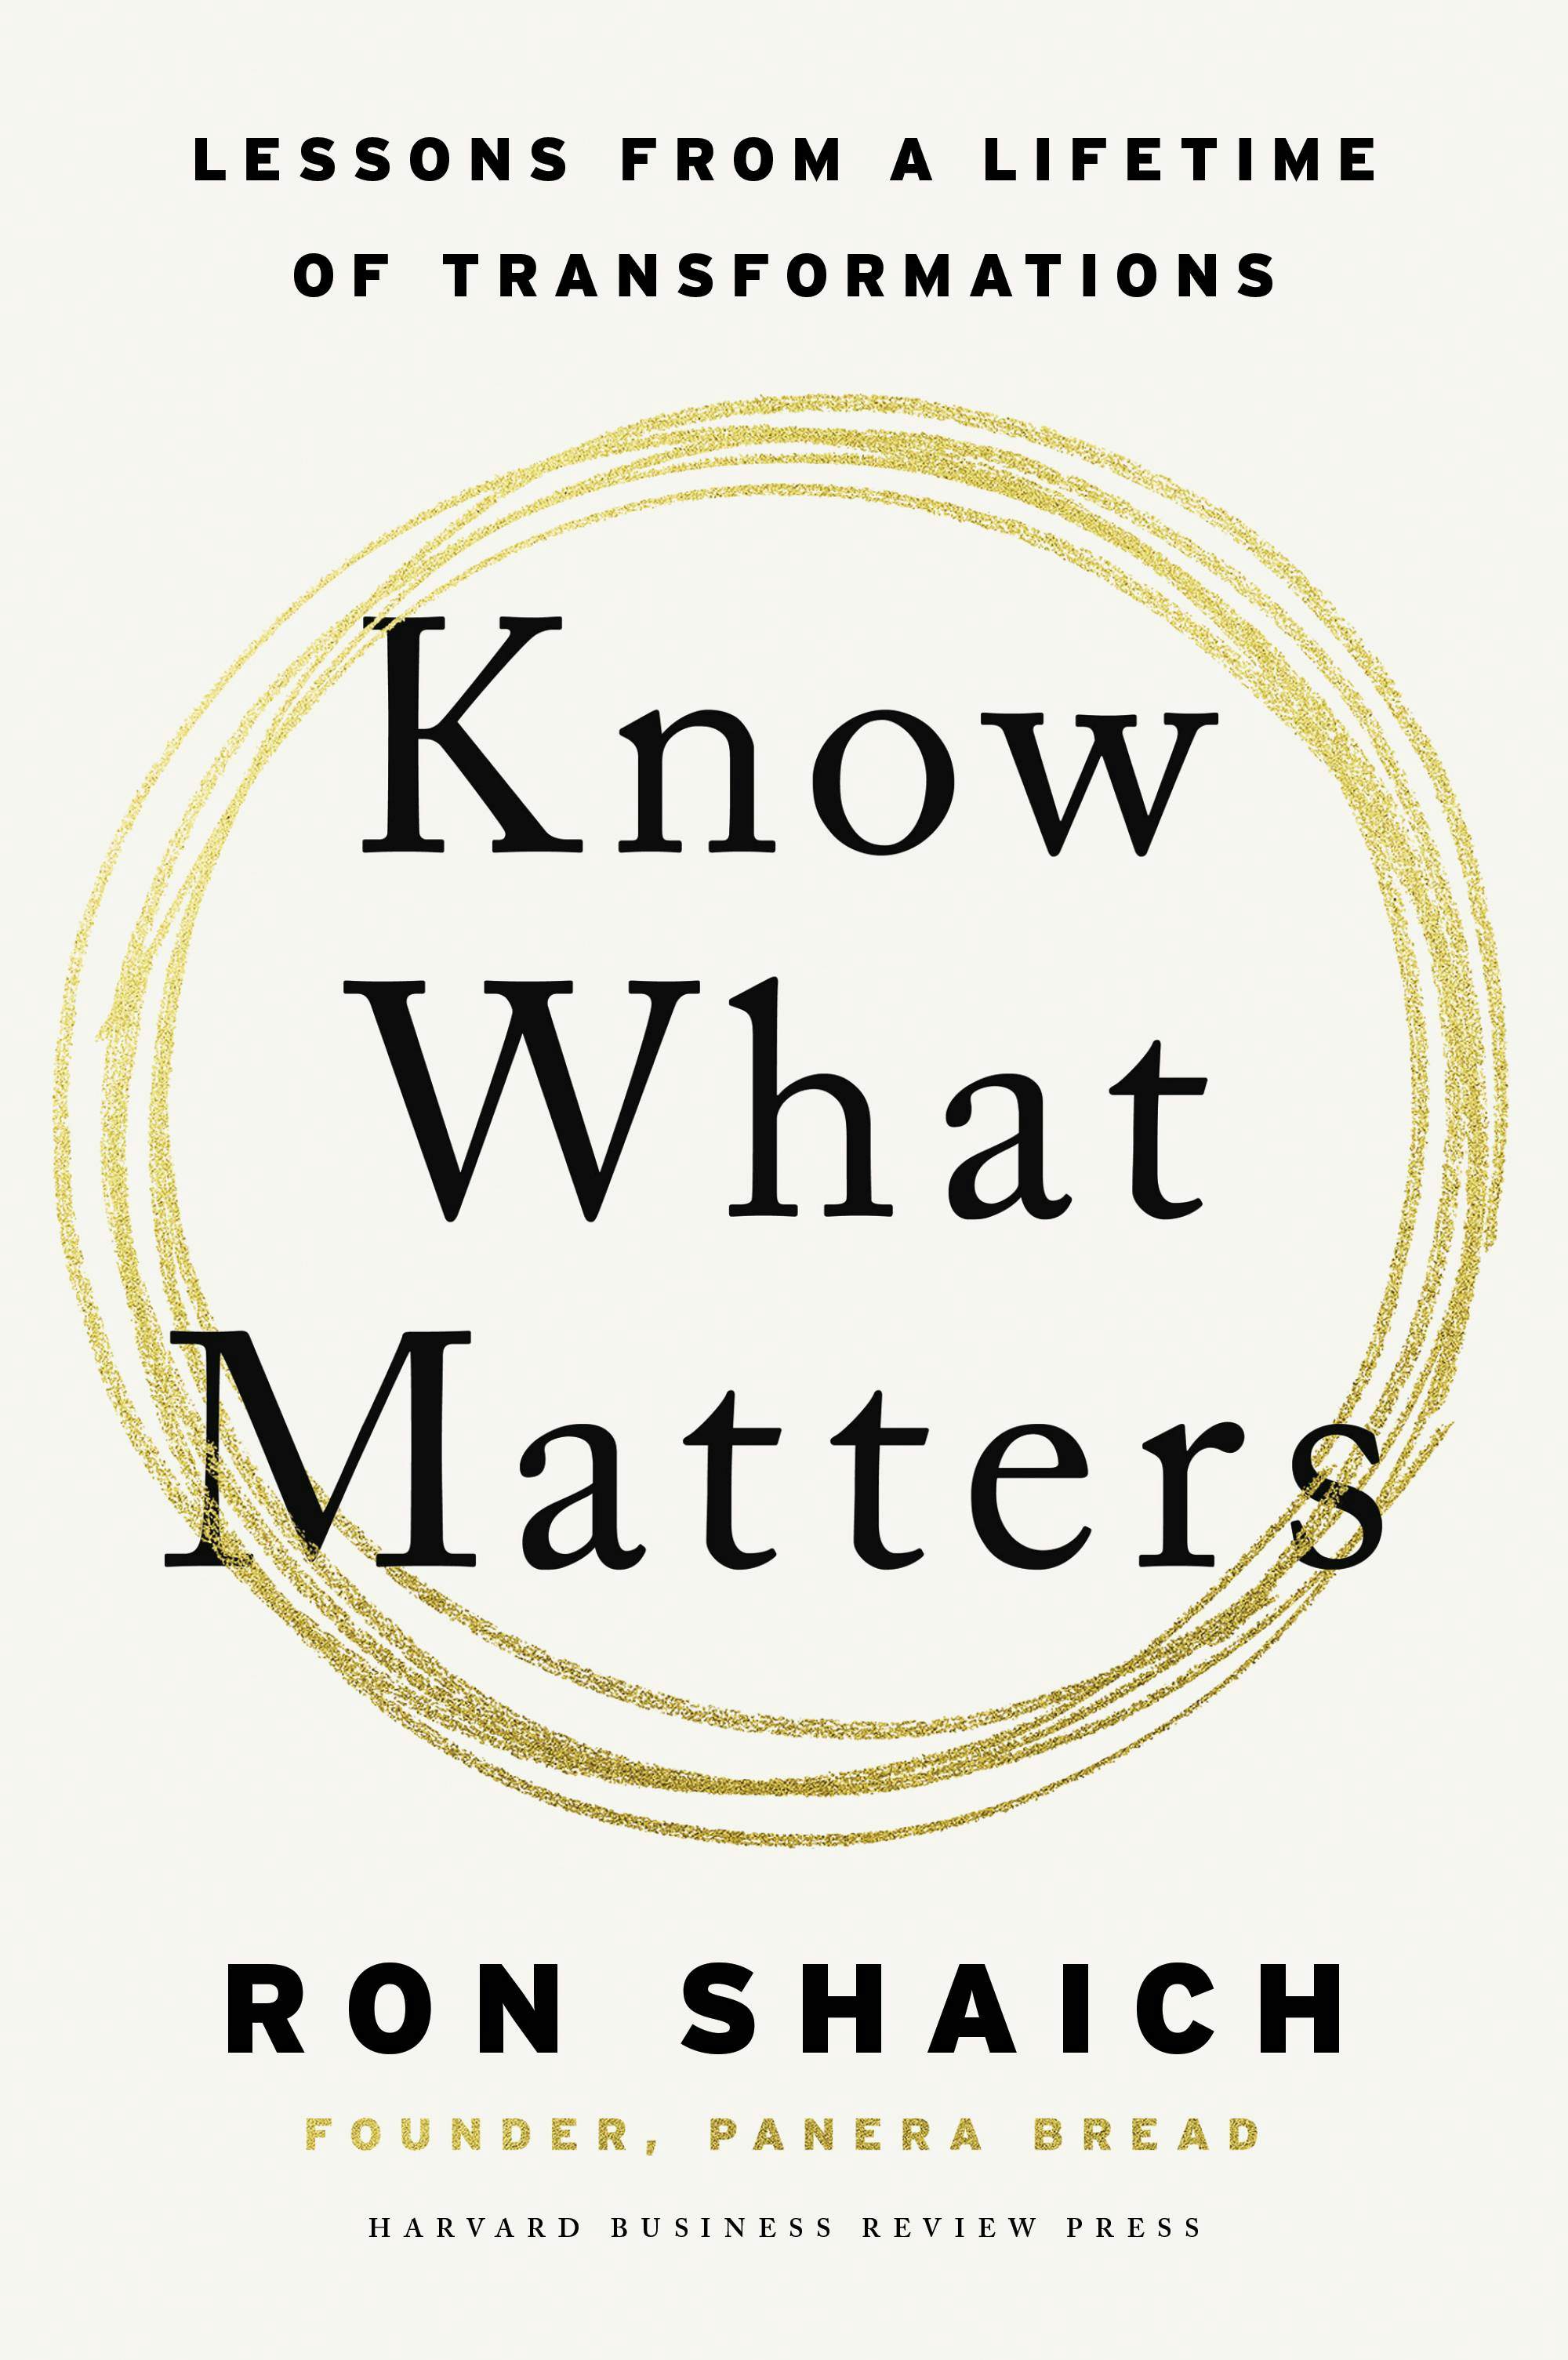 The book cover for Ron Shaich's "Know What Matters: Lessons from a Lifetime of Transformations"